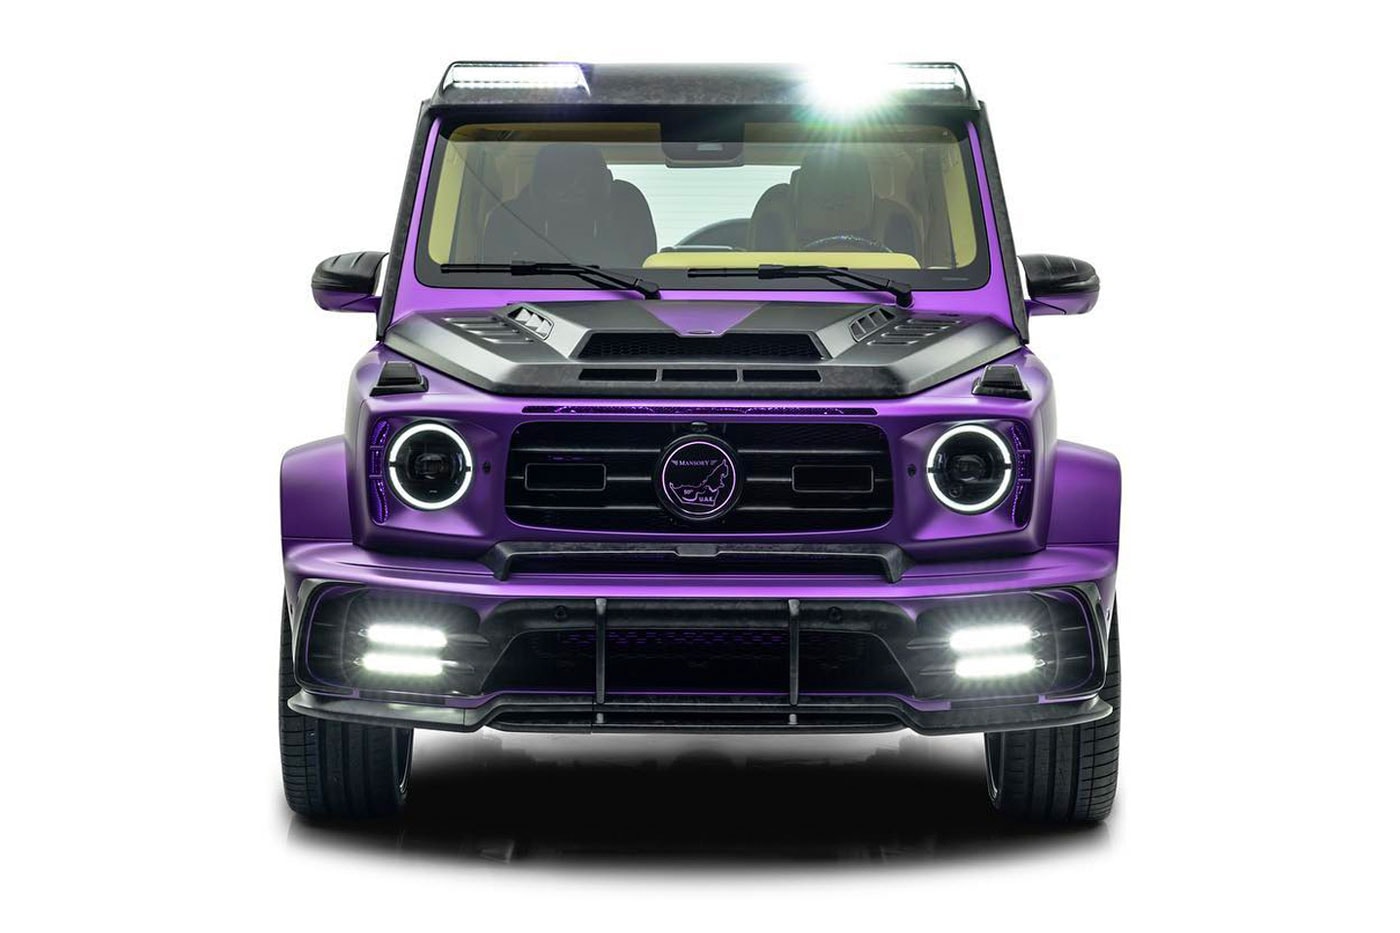 Mansory Mercedes-Benz AMG G63 truck suv purple black UAE Edition lakers colors 4.0 litre twin turbo v8 900 bhp 885 torque release info